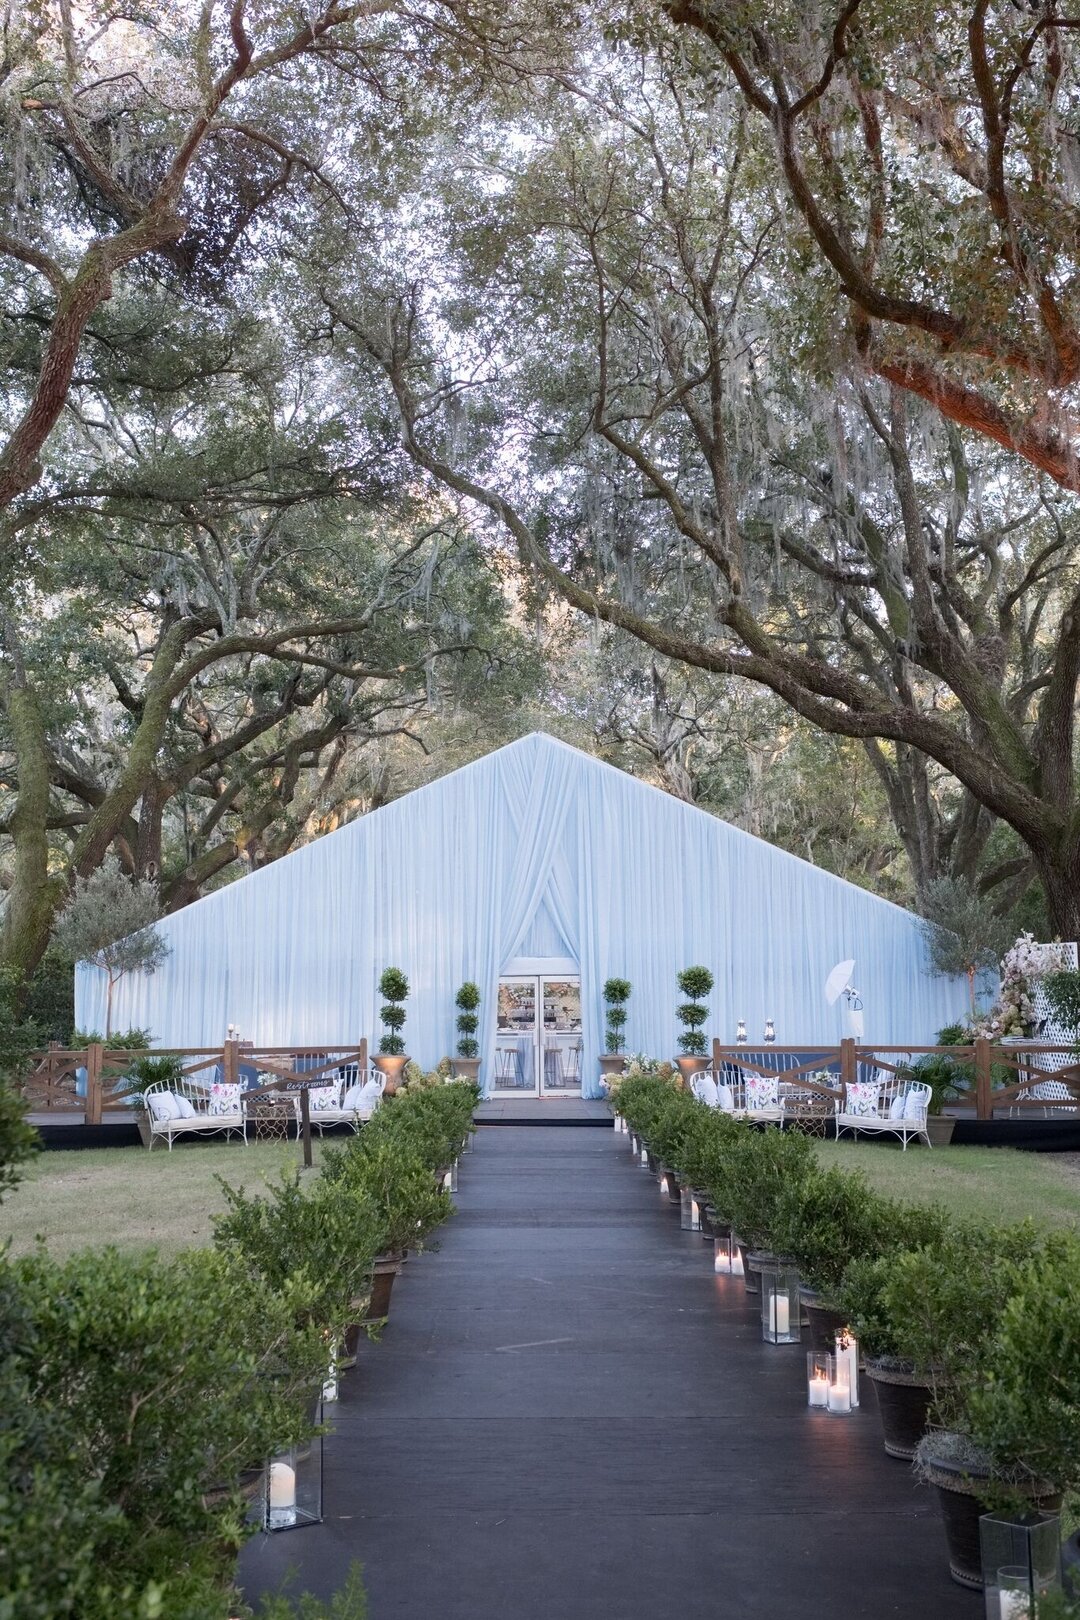 In a blue state of mind as we bring this hue of fabric into our design this weekend 💙🩵💙
.
.
.
#bluedraping #bluecurtains #bluefabric #gableendentrance #gableendtent #tententrance #tentwalkway #weddingreception #tentedwedding #tenttransformation #t